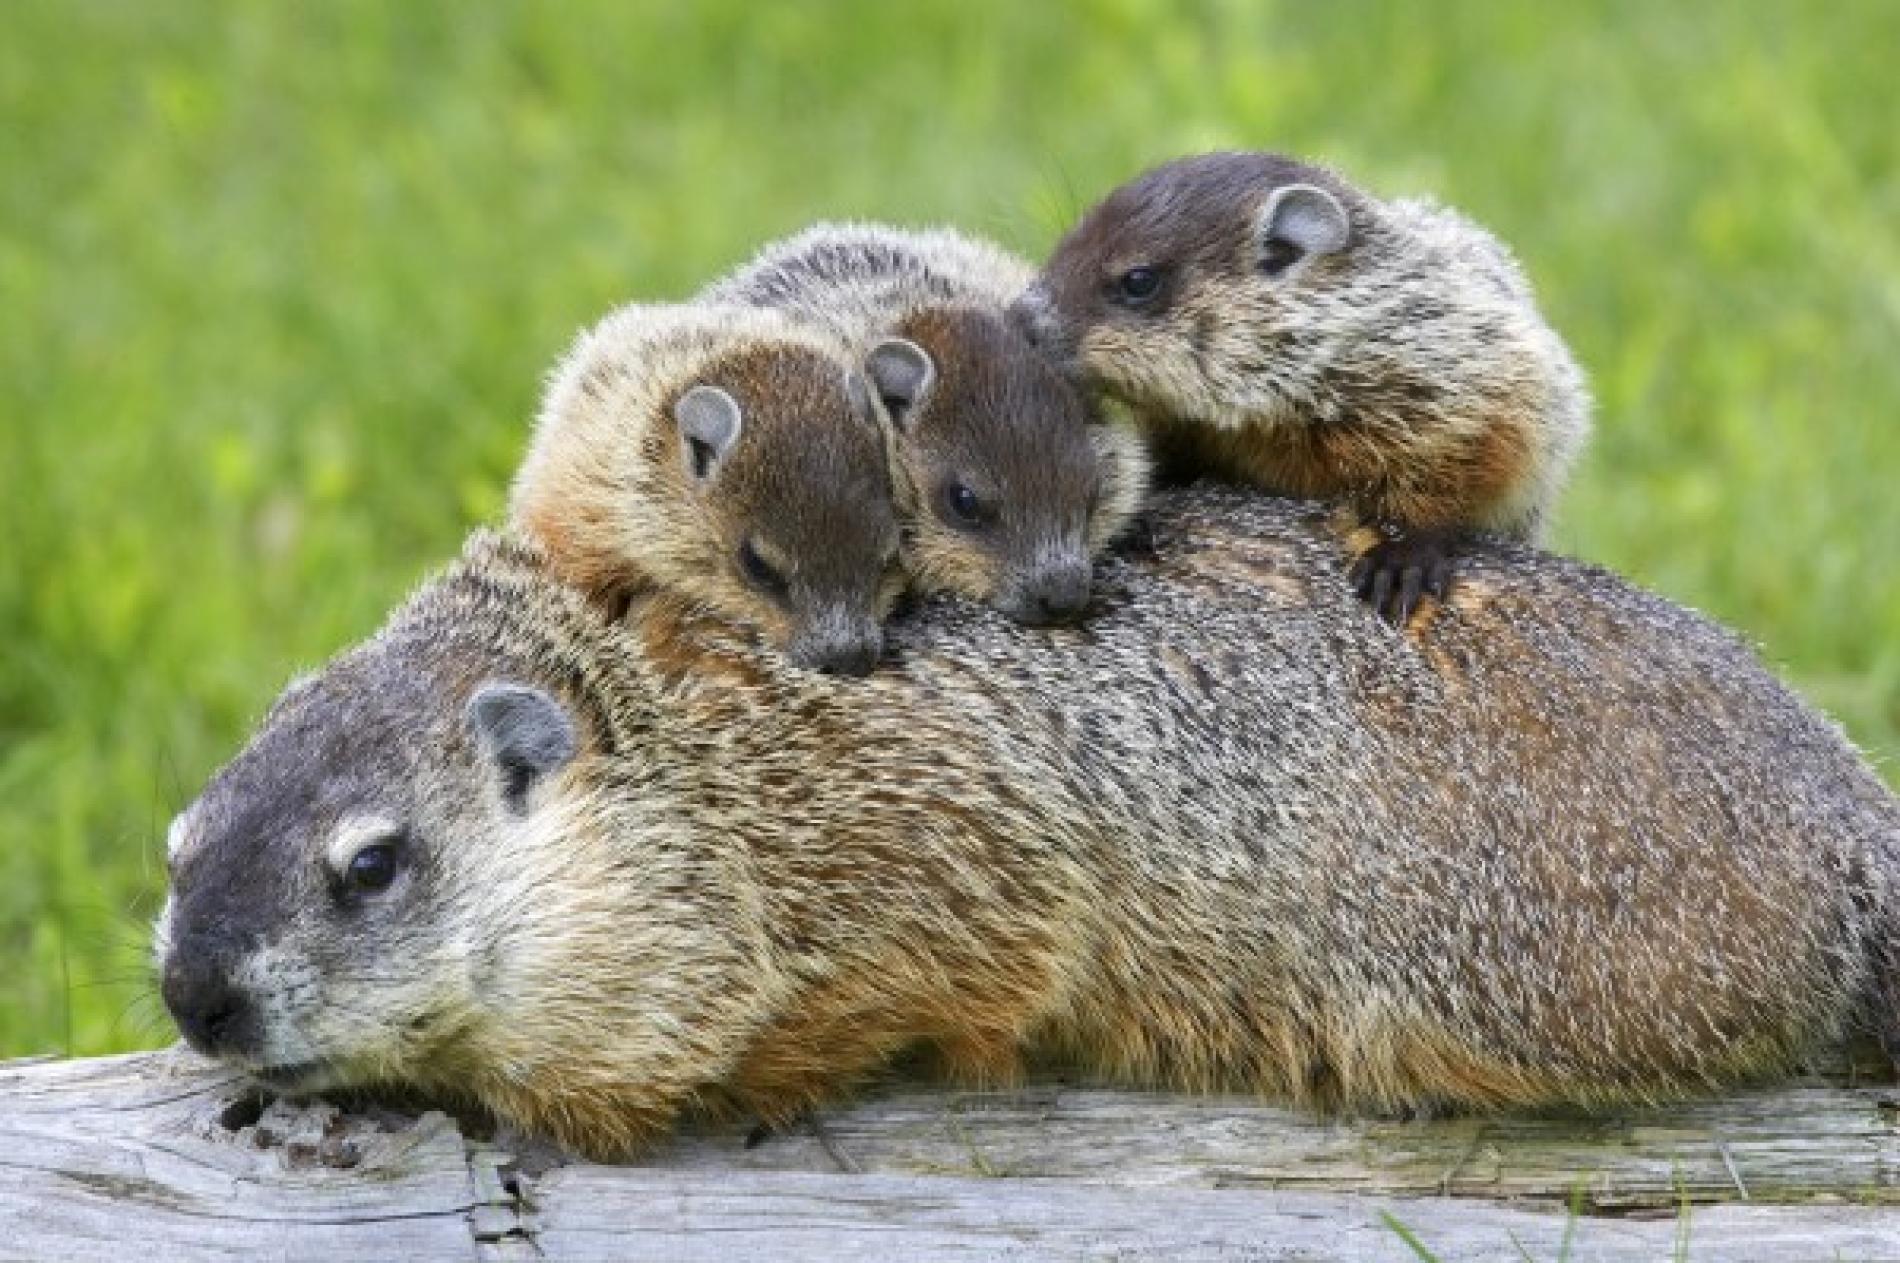 Happy Groundhog Day! The Michigan Weather Center